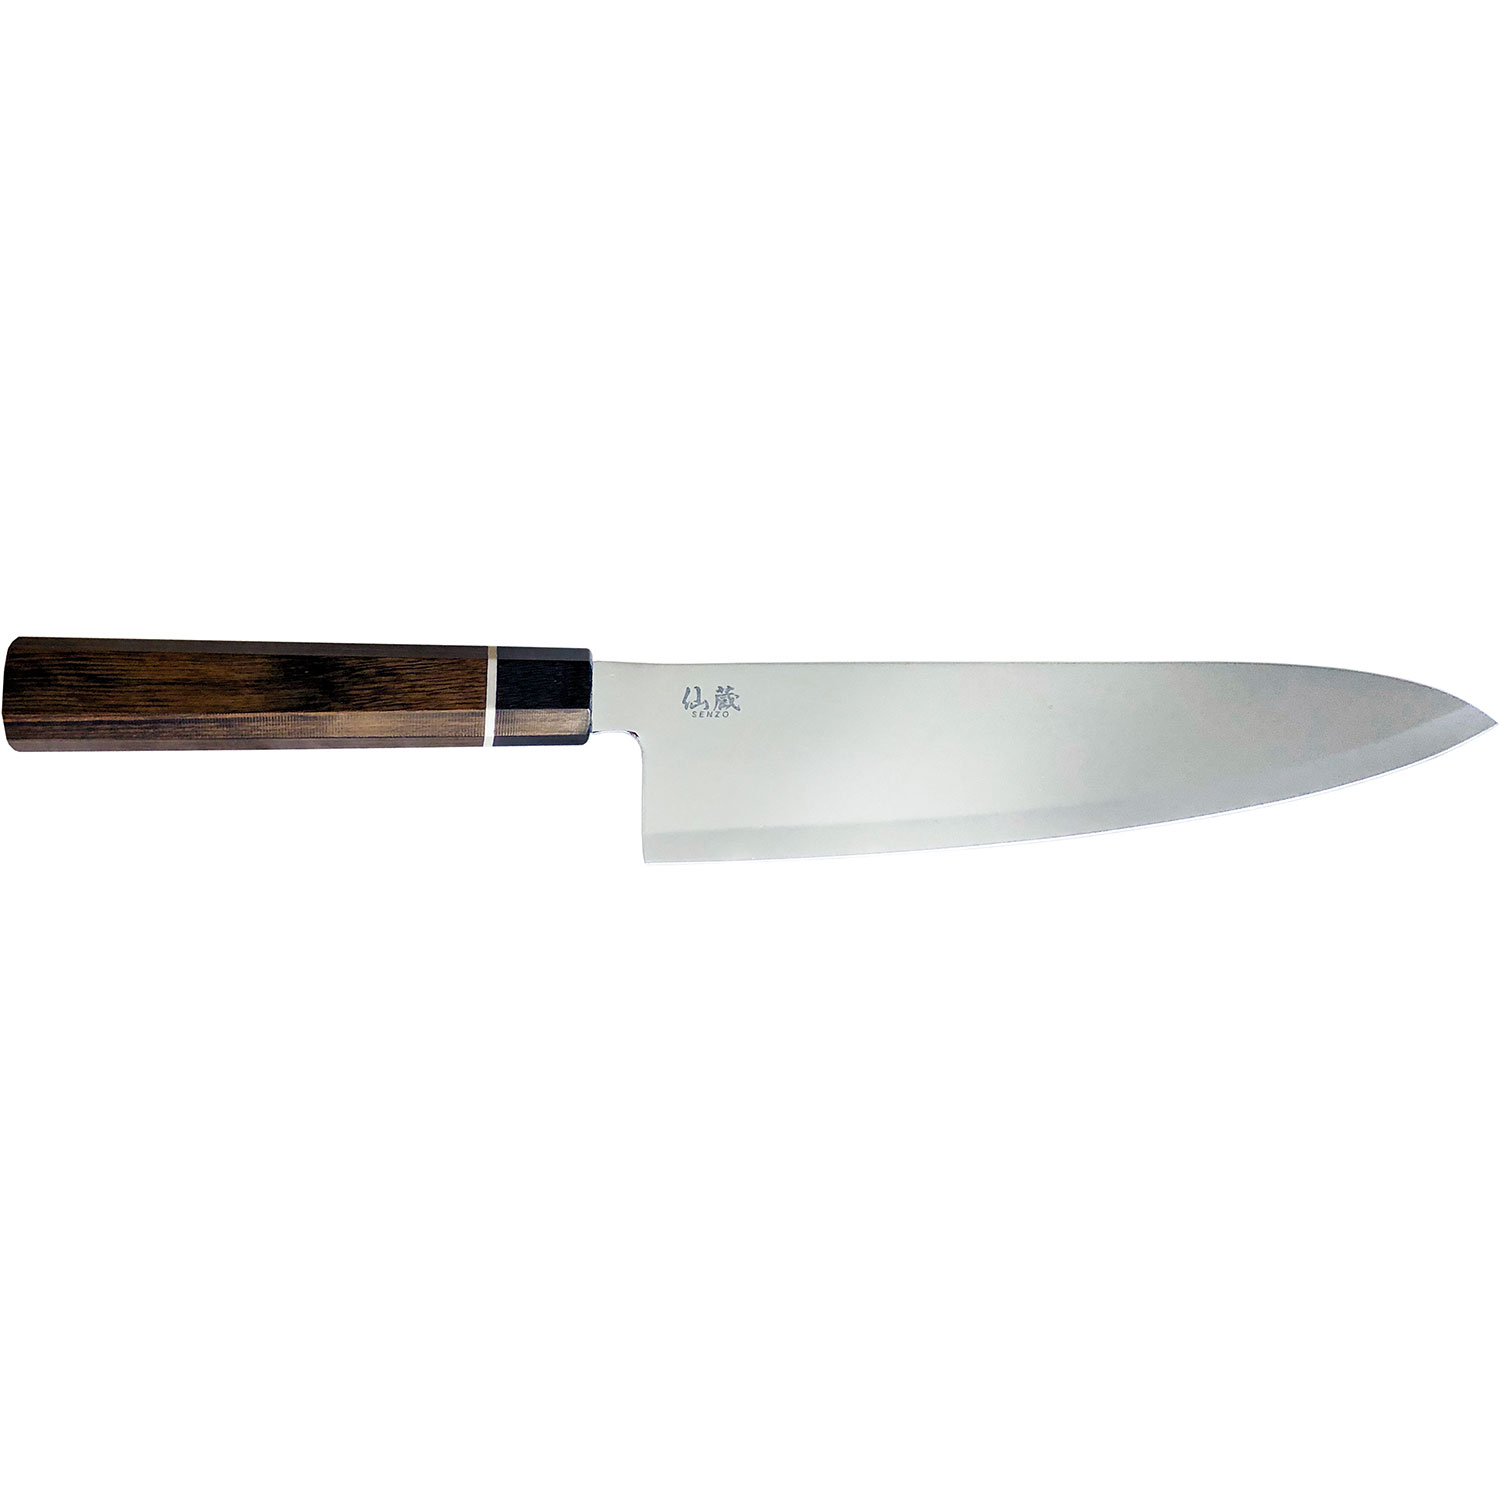 Gyuto Knife - High End Stainless Steel